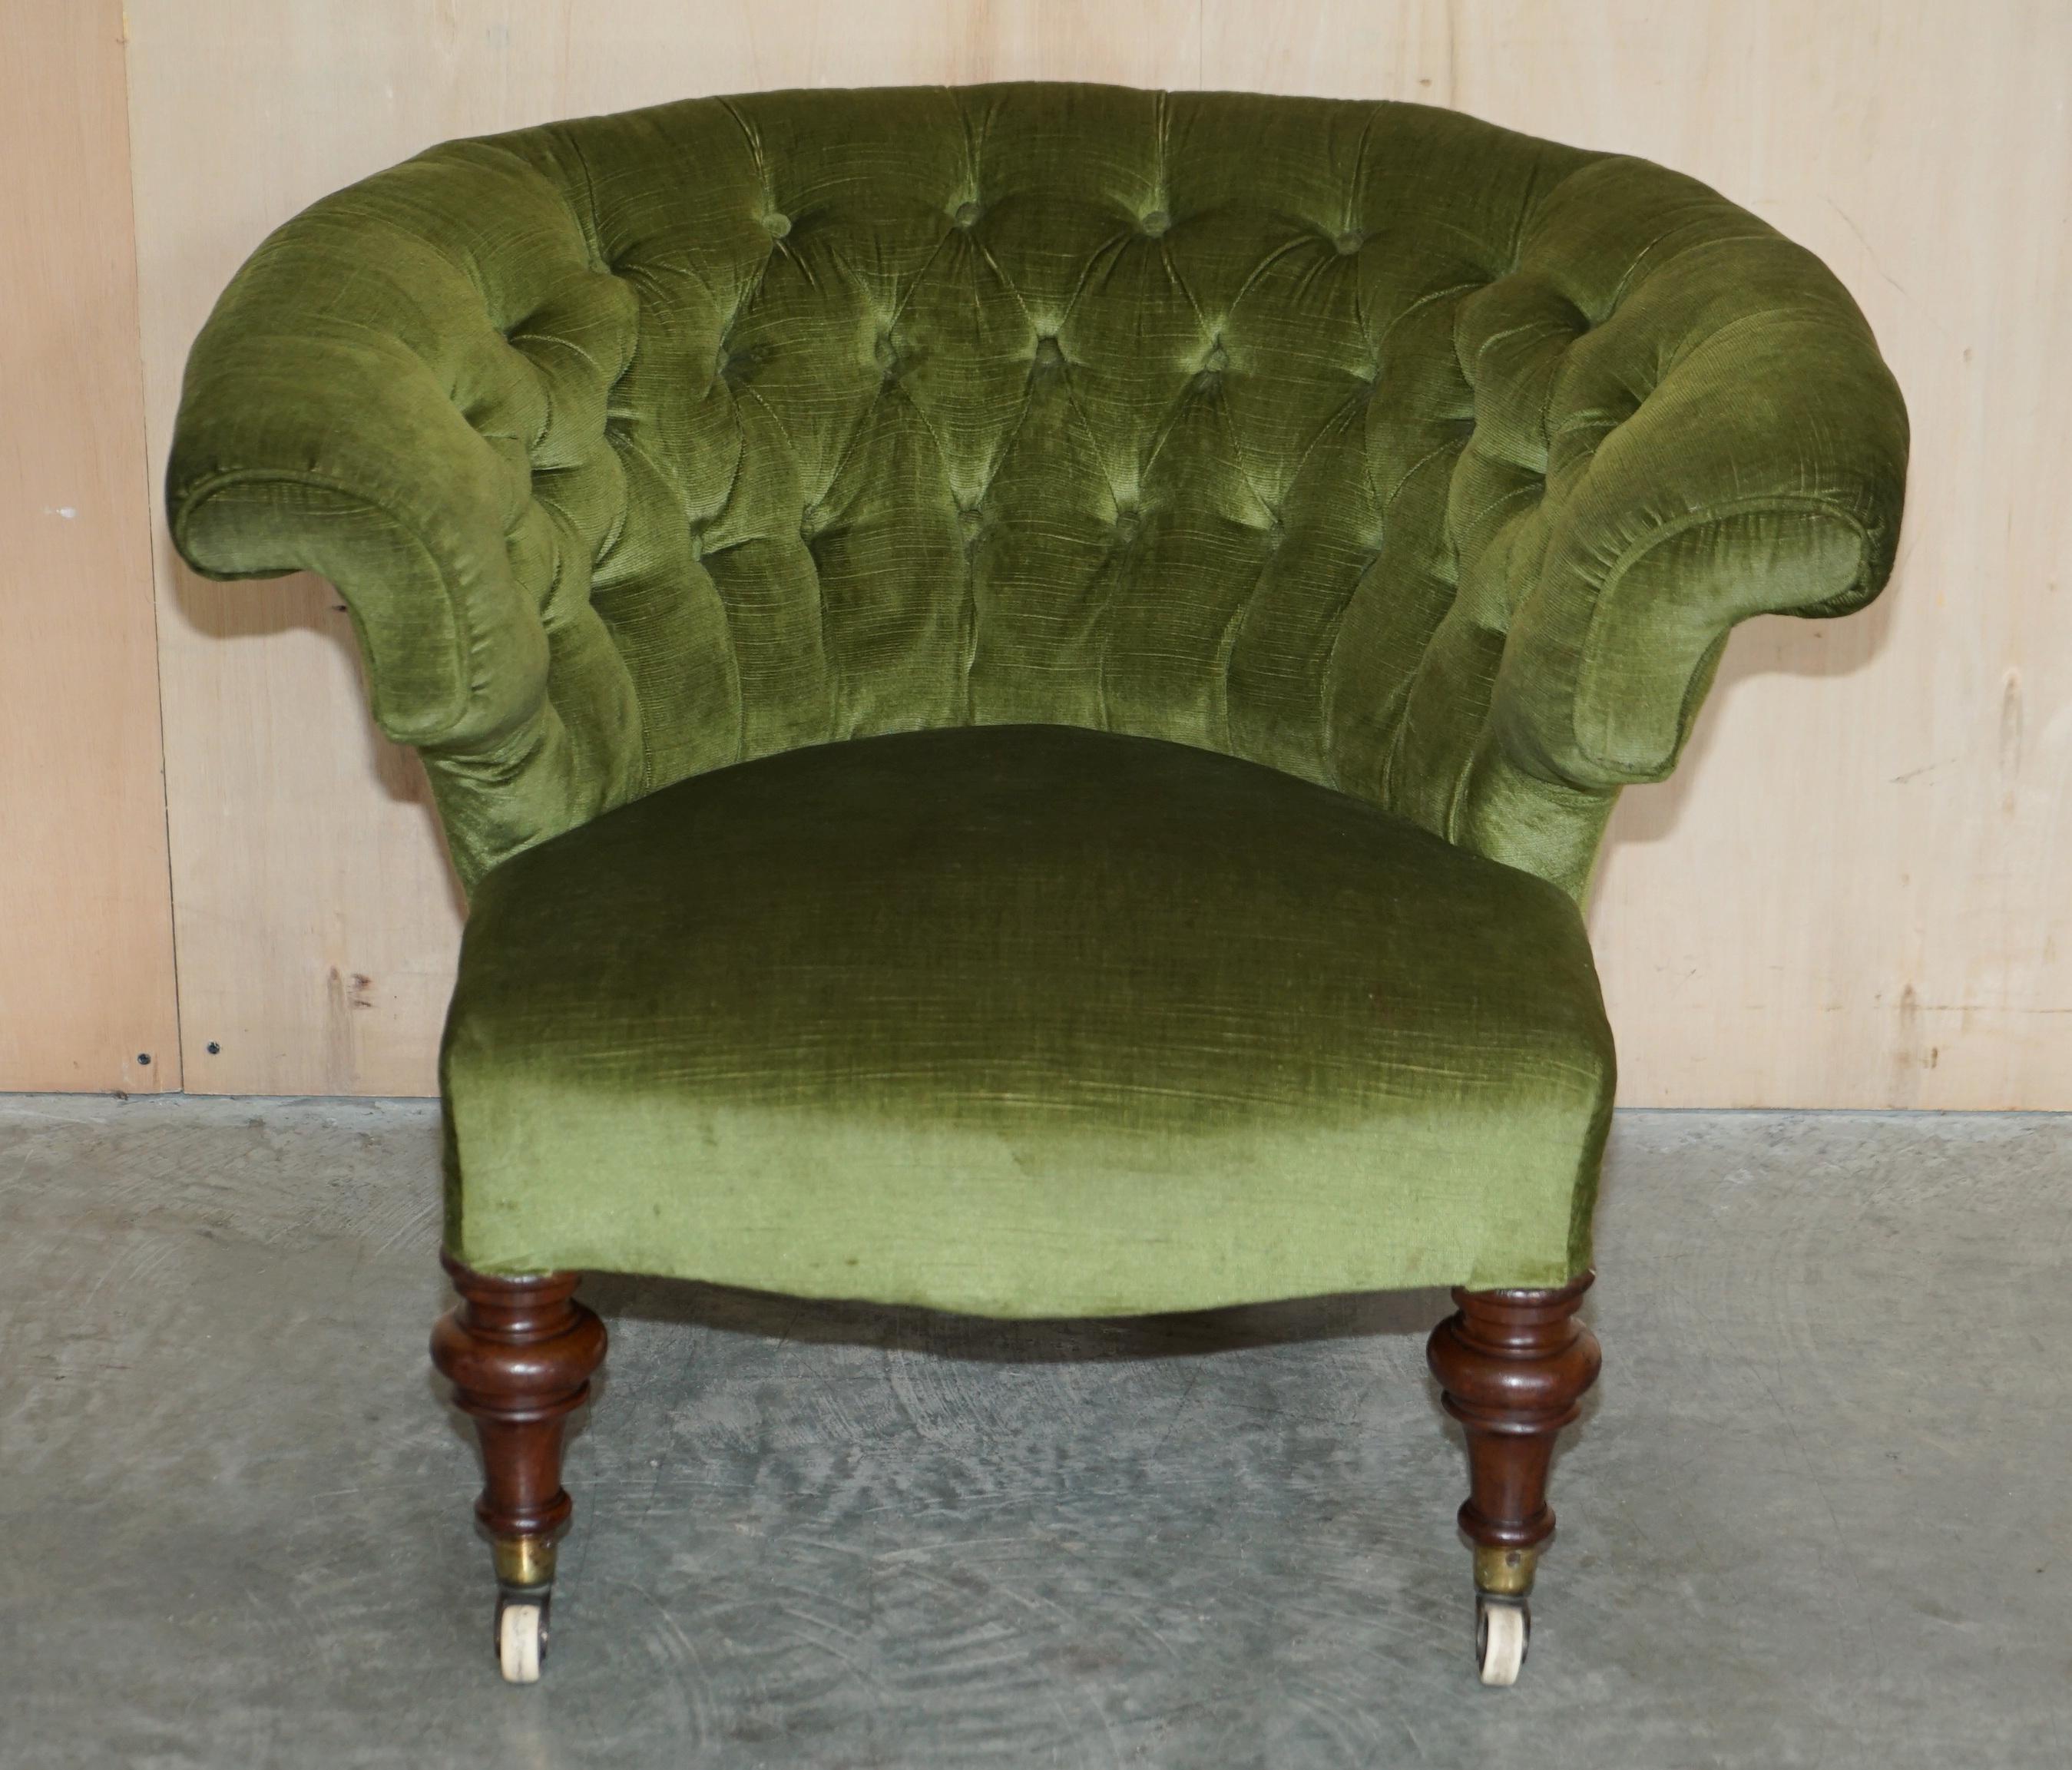 We are delighted to offer for sale this super rare, original circa 1810-1820 Regency Chesterfield green velour library armchair

A very well made and unique armchair, originally designed as a gentleman’s library armchair but it of course can be